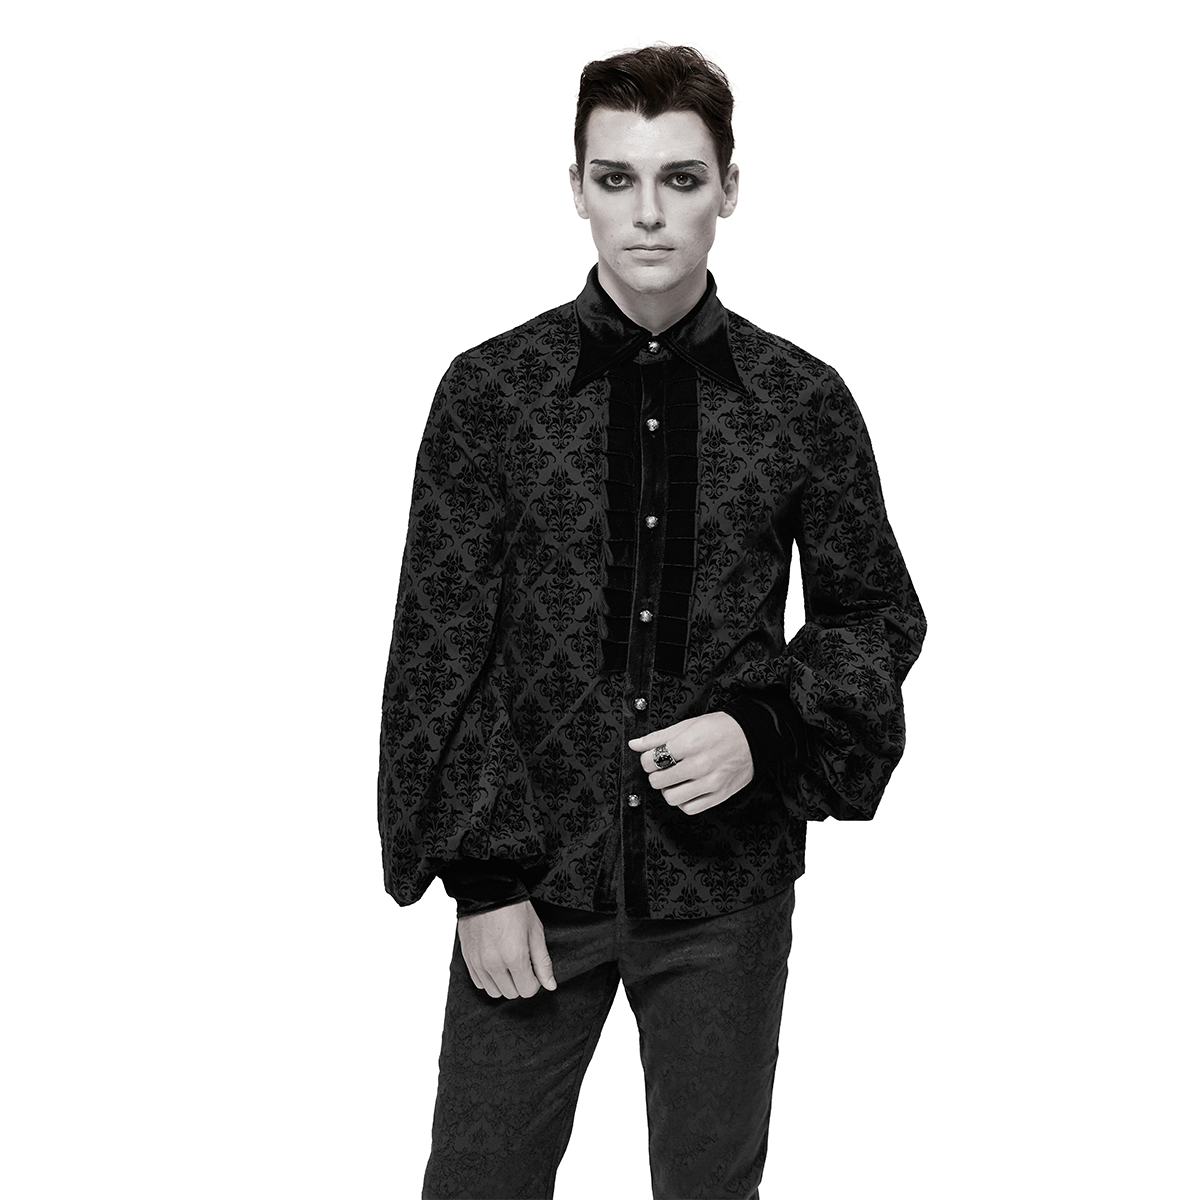 Gothic Black Shirt with Filigree Design / Men's Wide Sleeves Lapel Collar Shirts - HARD'N'HEAVY